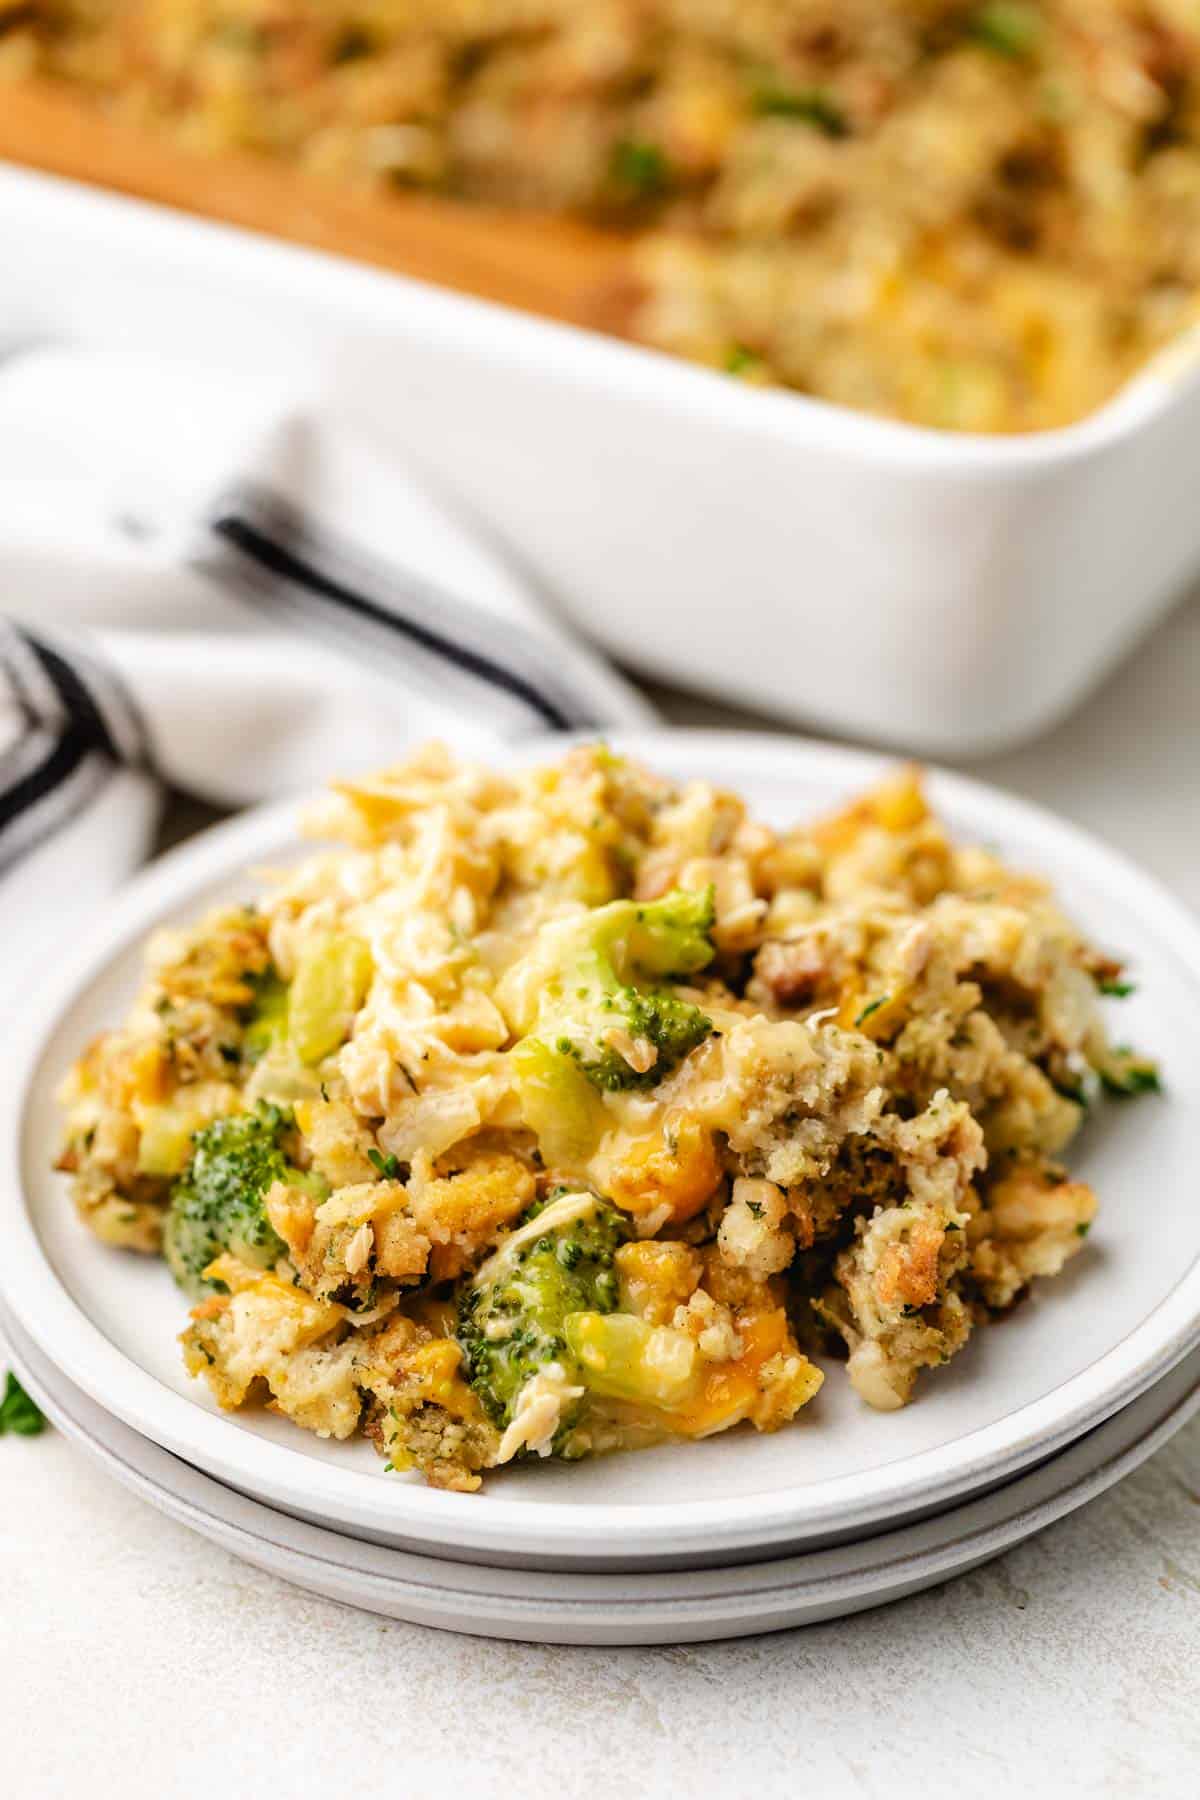 Scoops of chicken and broccoli stuffing casserole on a stack of plates.